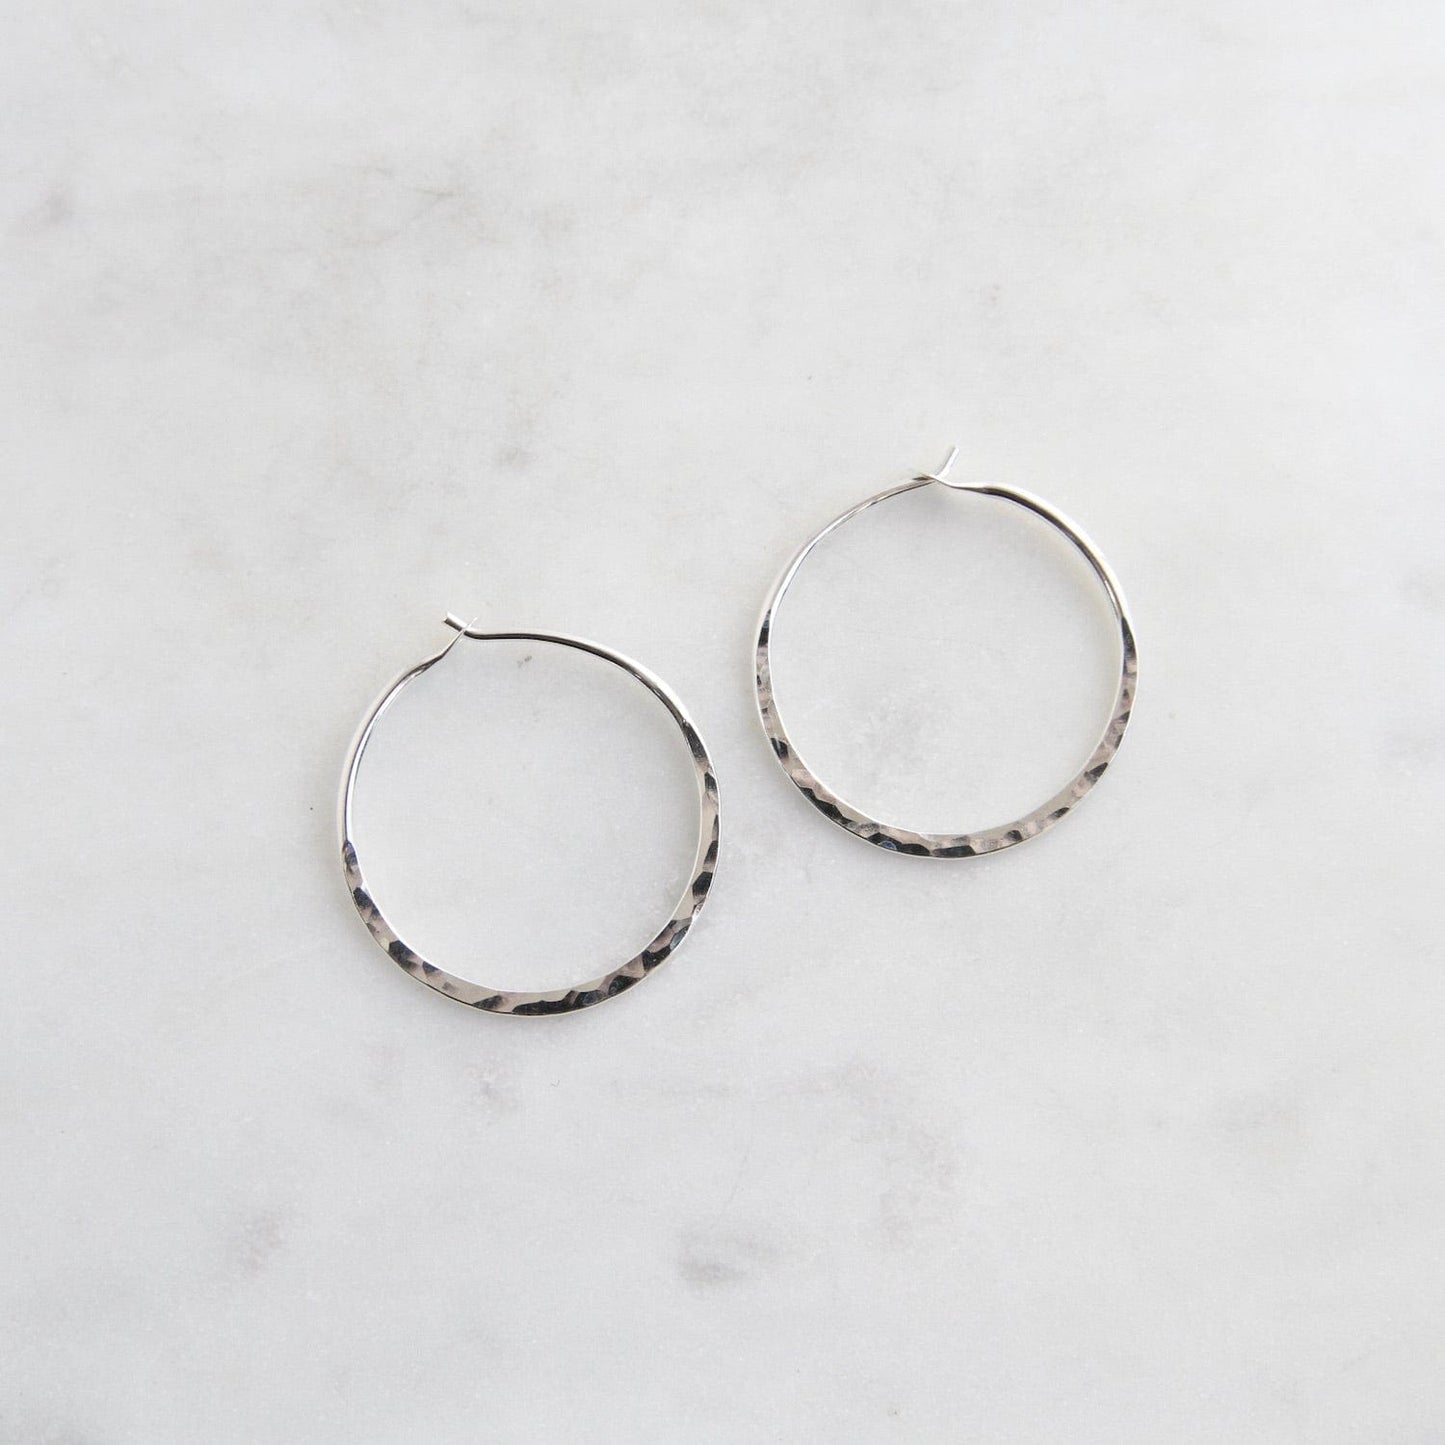 EAR Thin 25mm Sterling Silver Hammered Hoop